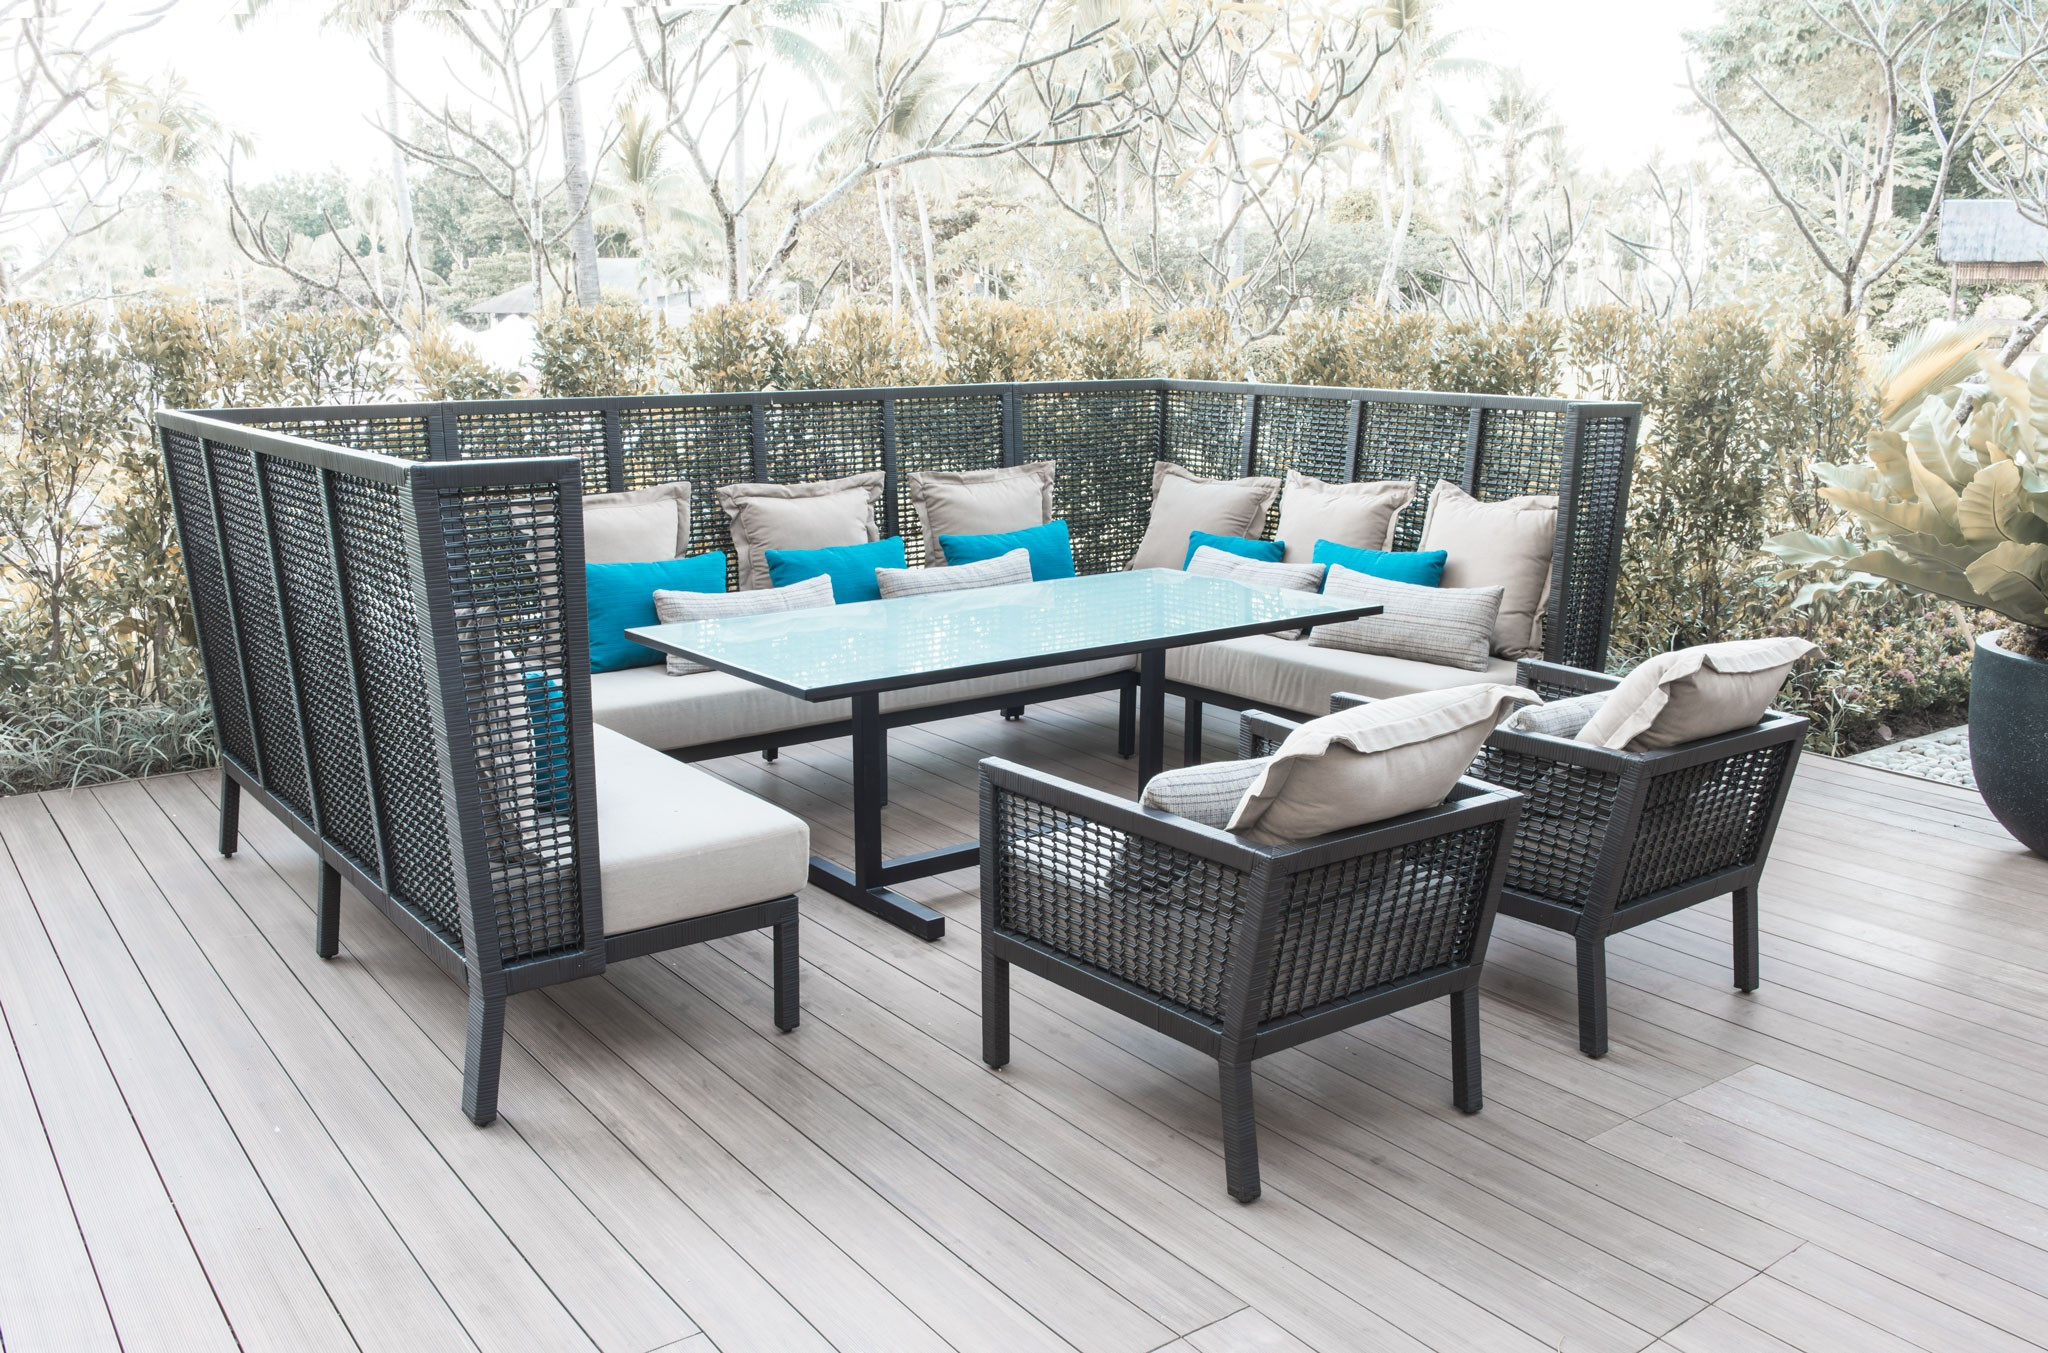 16 Stylish Grey Hardwood Floors Lowes 2022 free download grey hardwood floors lowes of lowes patio furniture covers lovely marvelous wicker outdoor regarding lowes patio furniture covers fresh 30 top lowes wicker patio furniture design of lowes pa